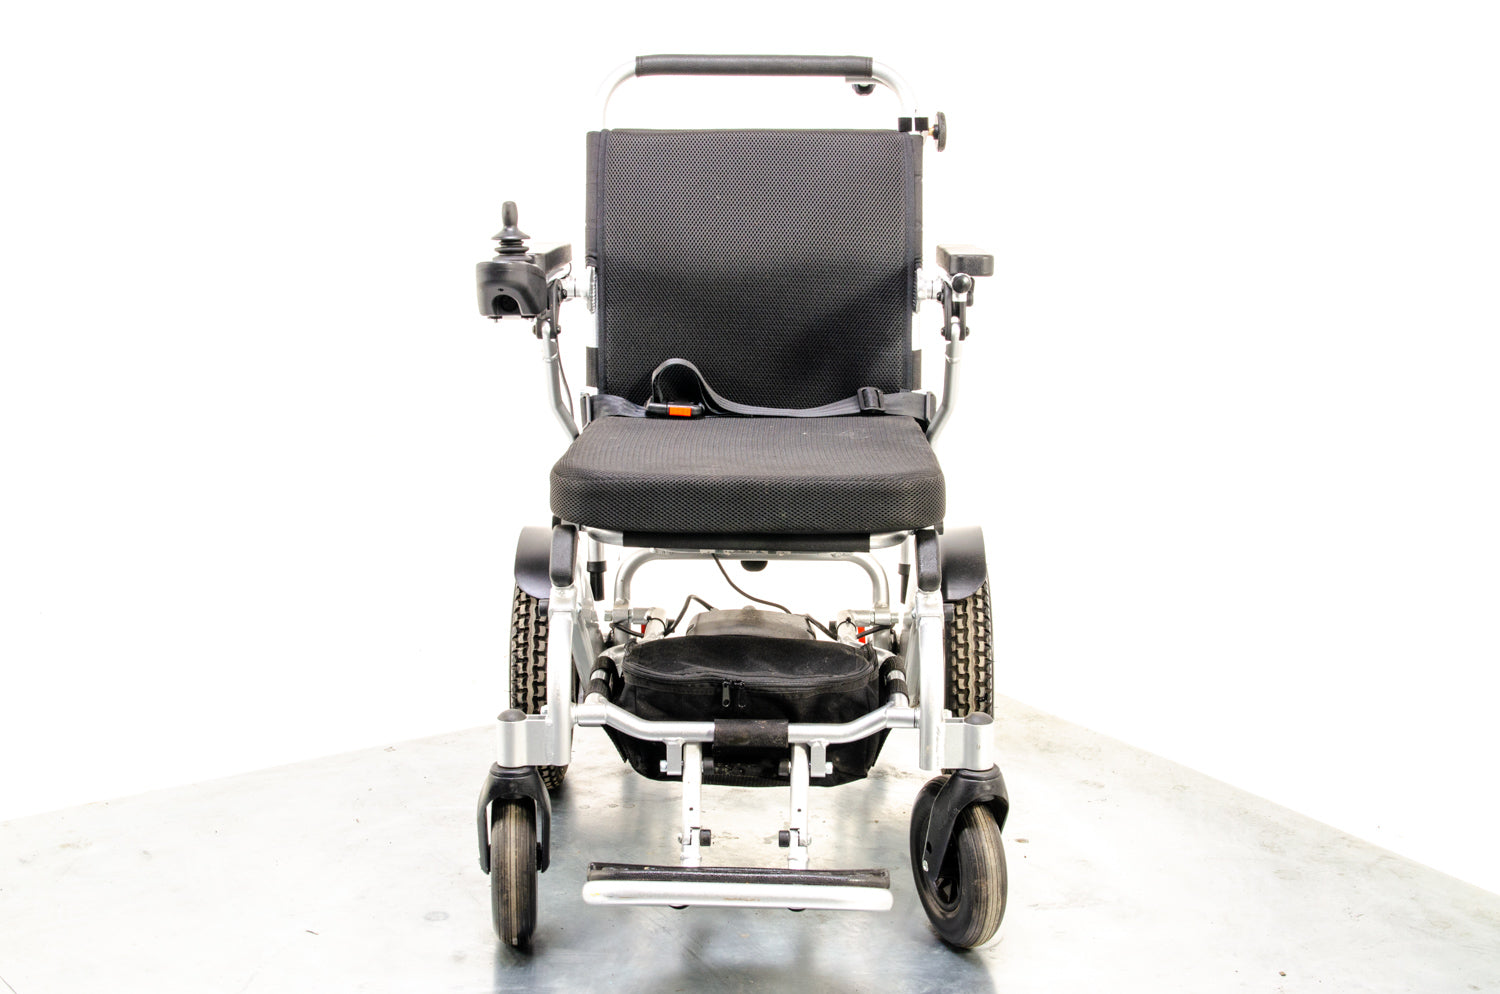 Freedom Chair A06L Used Electric Folding Wheelchair Powerchair Portable Transportable Lithium Aluminium Lightweight Attendant Brushless